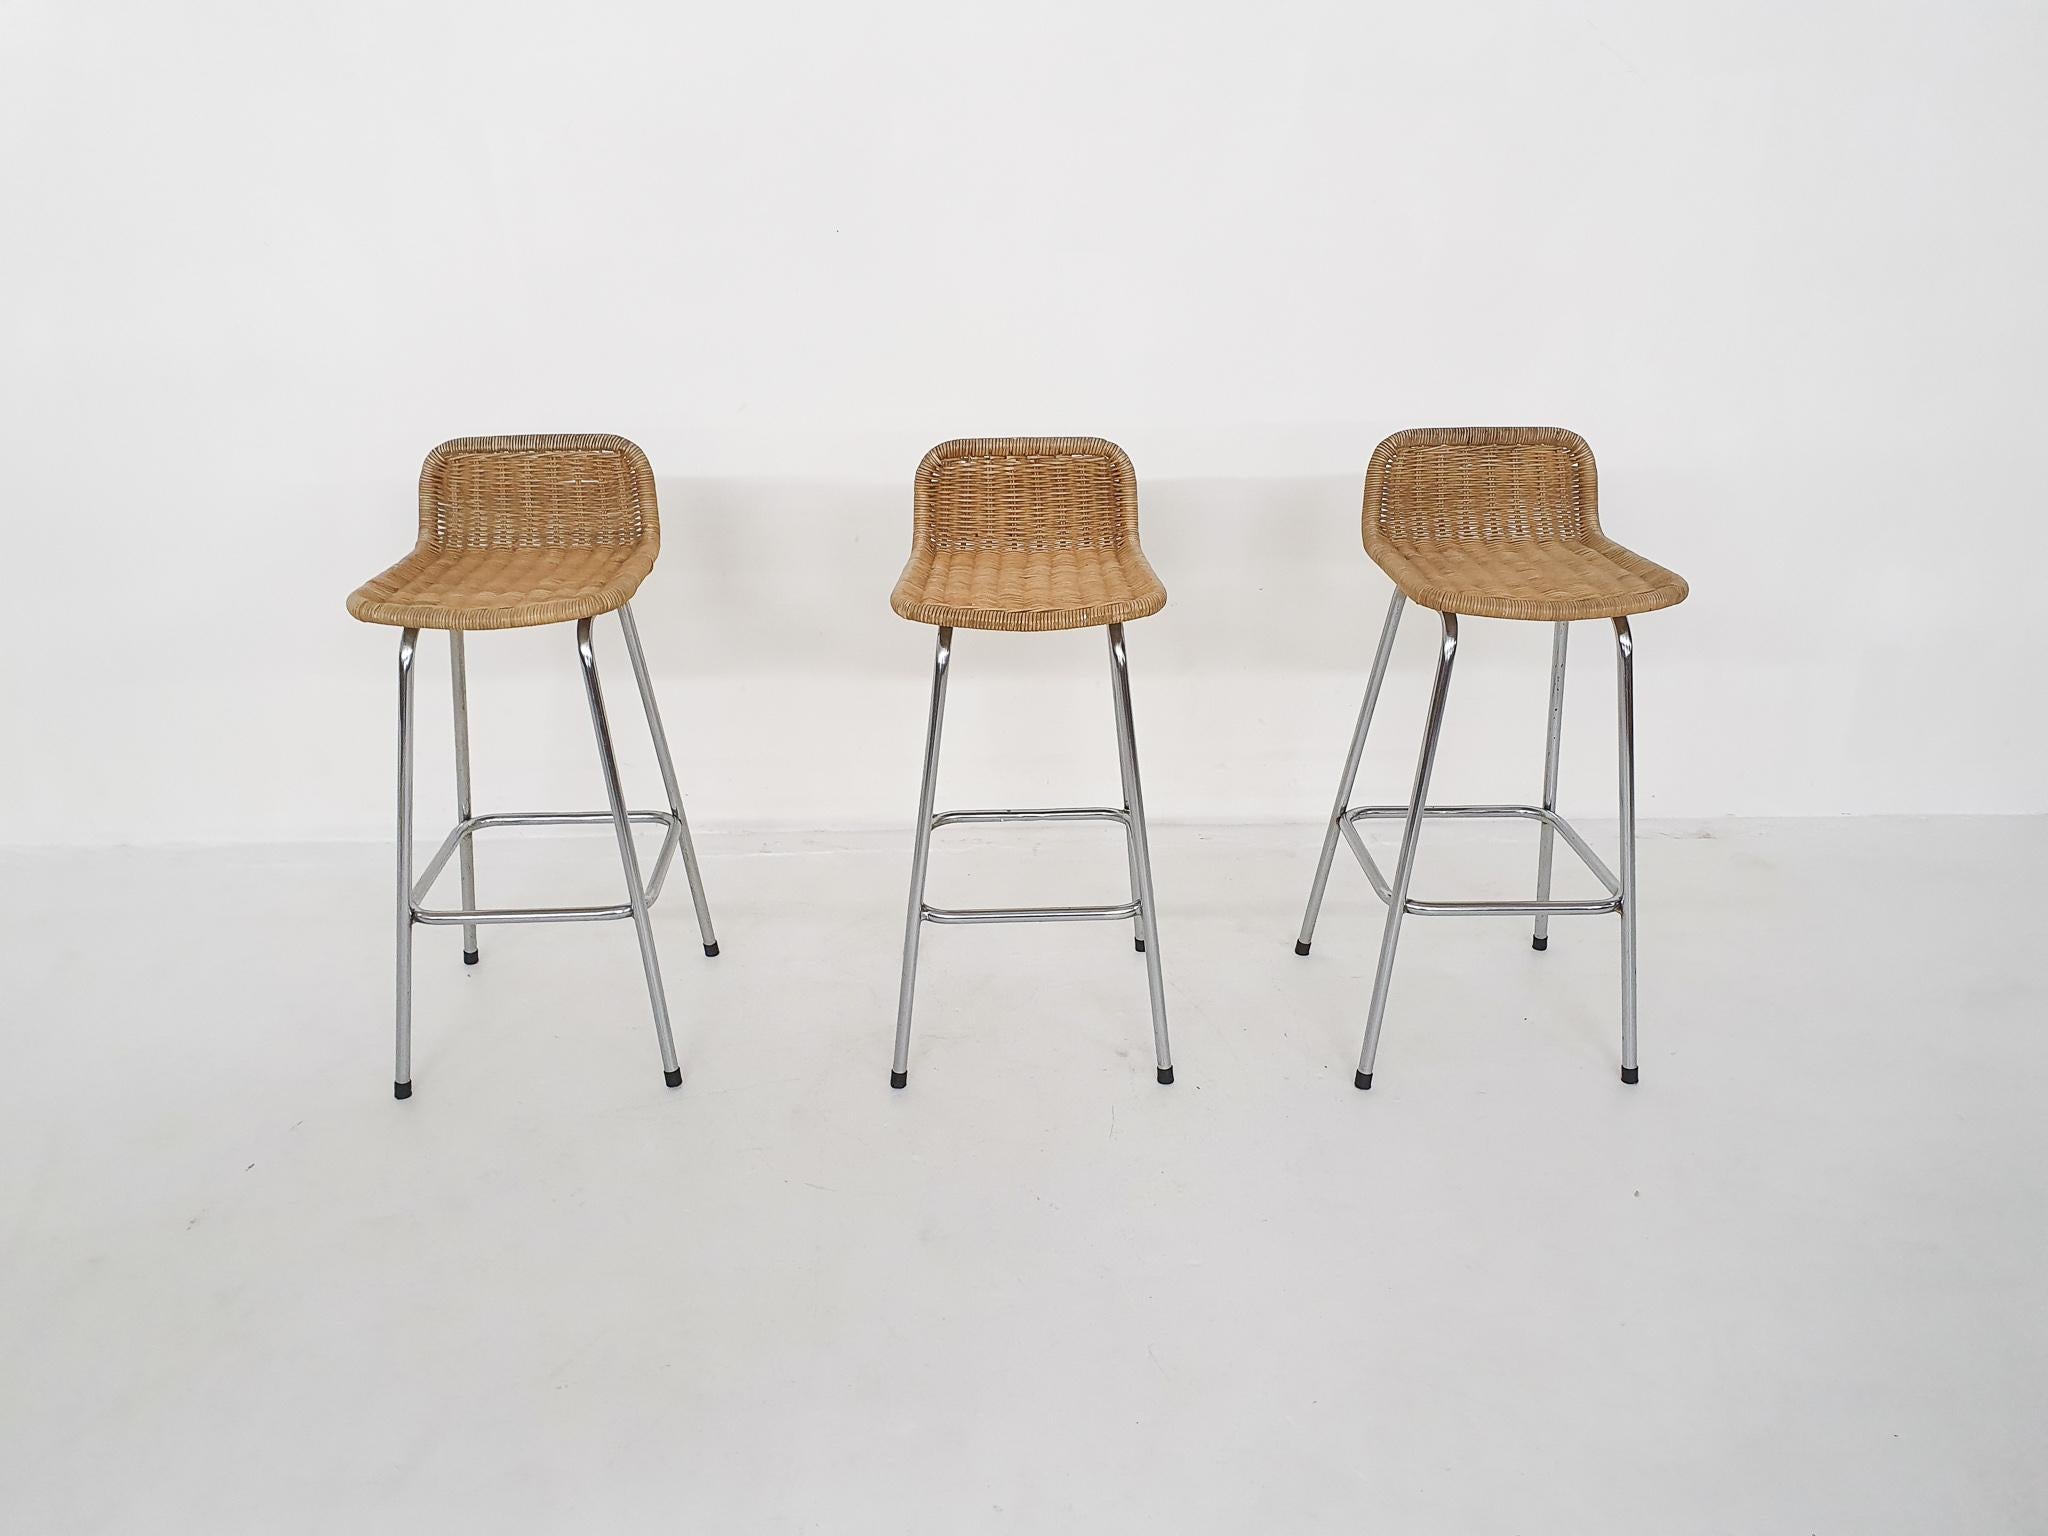 Mid-Century Modern Set of Three Rohe Noordwolde Rattan and Metal Bar Stools, the Netherlands 1950's